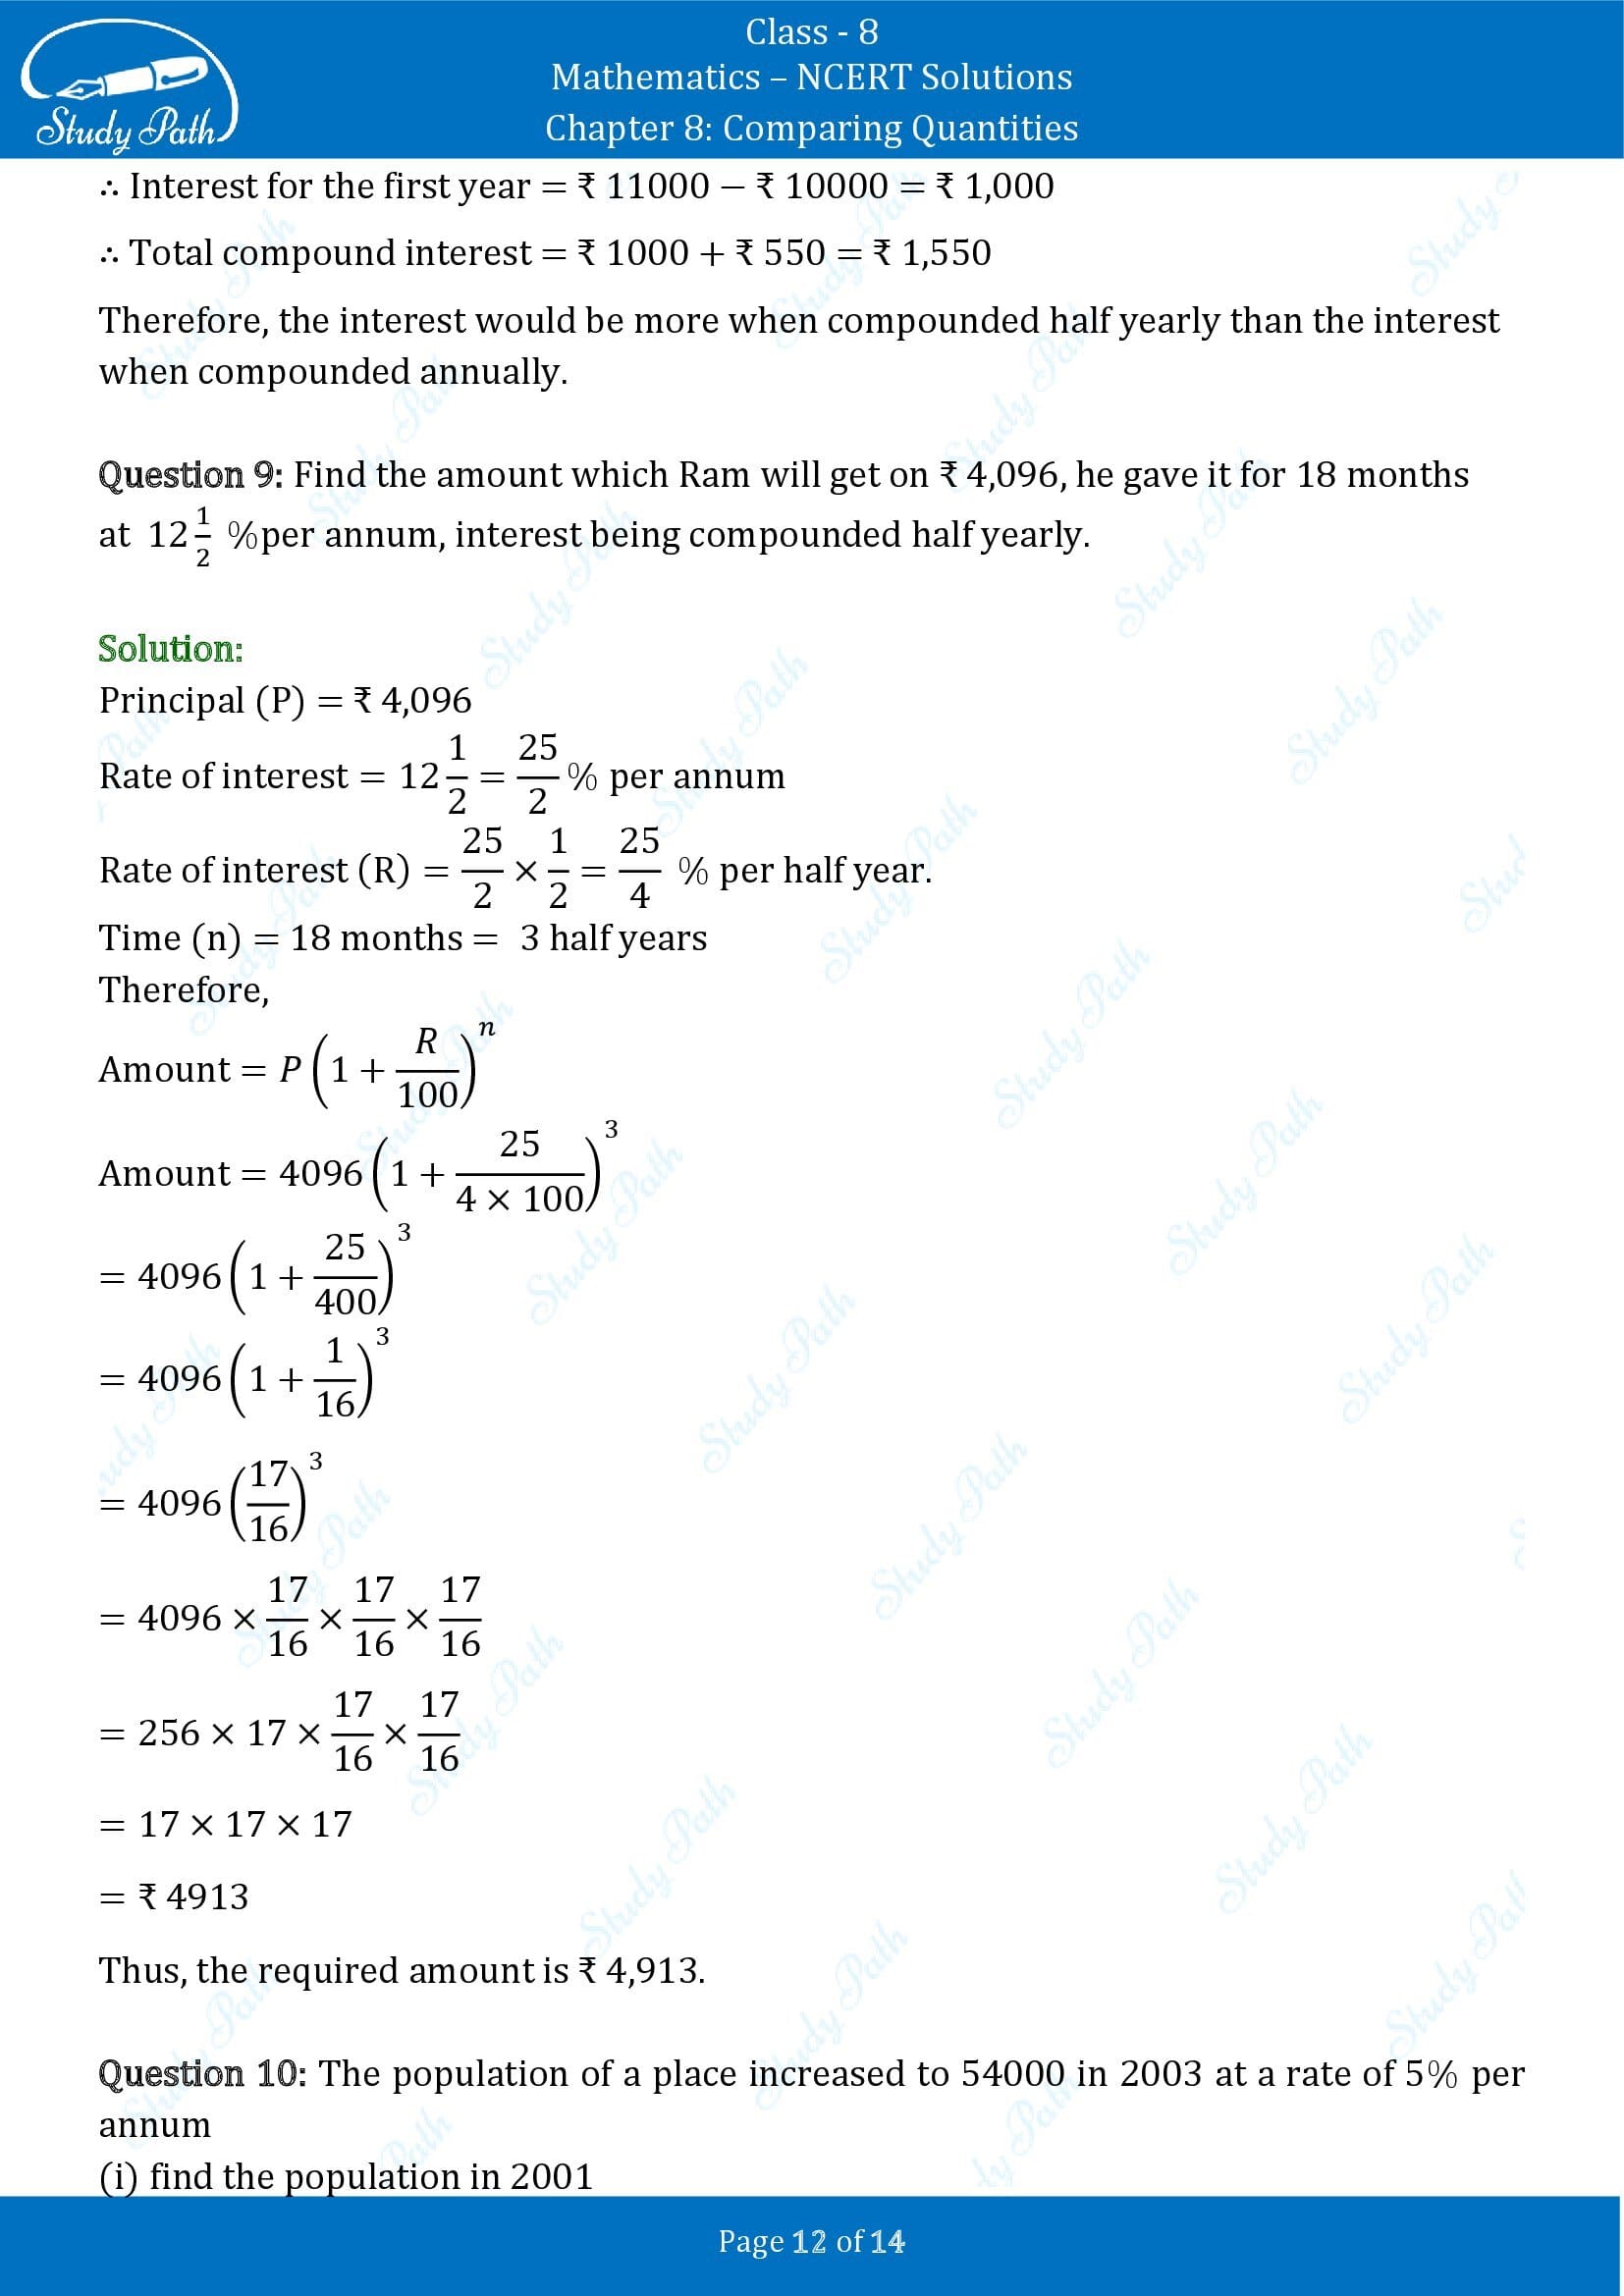 NCERT Solutions for Class 8 Maths Chapter 8 Comparing Quantities Exercise 8.3 00012